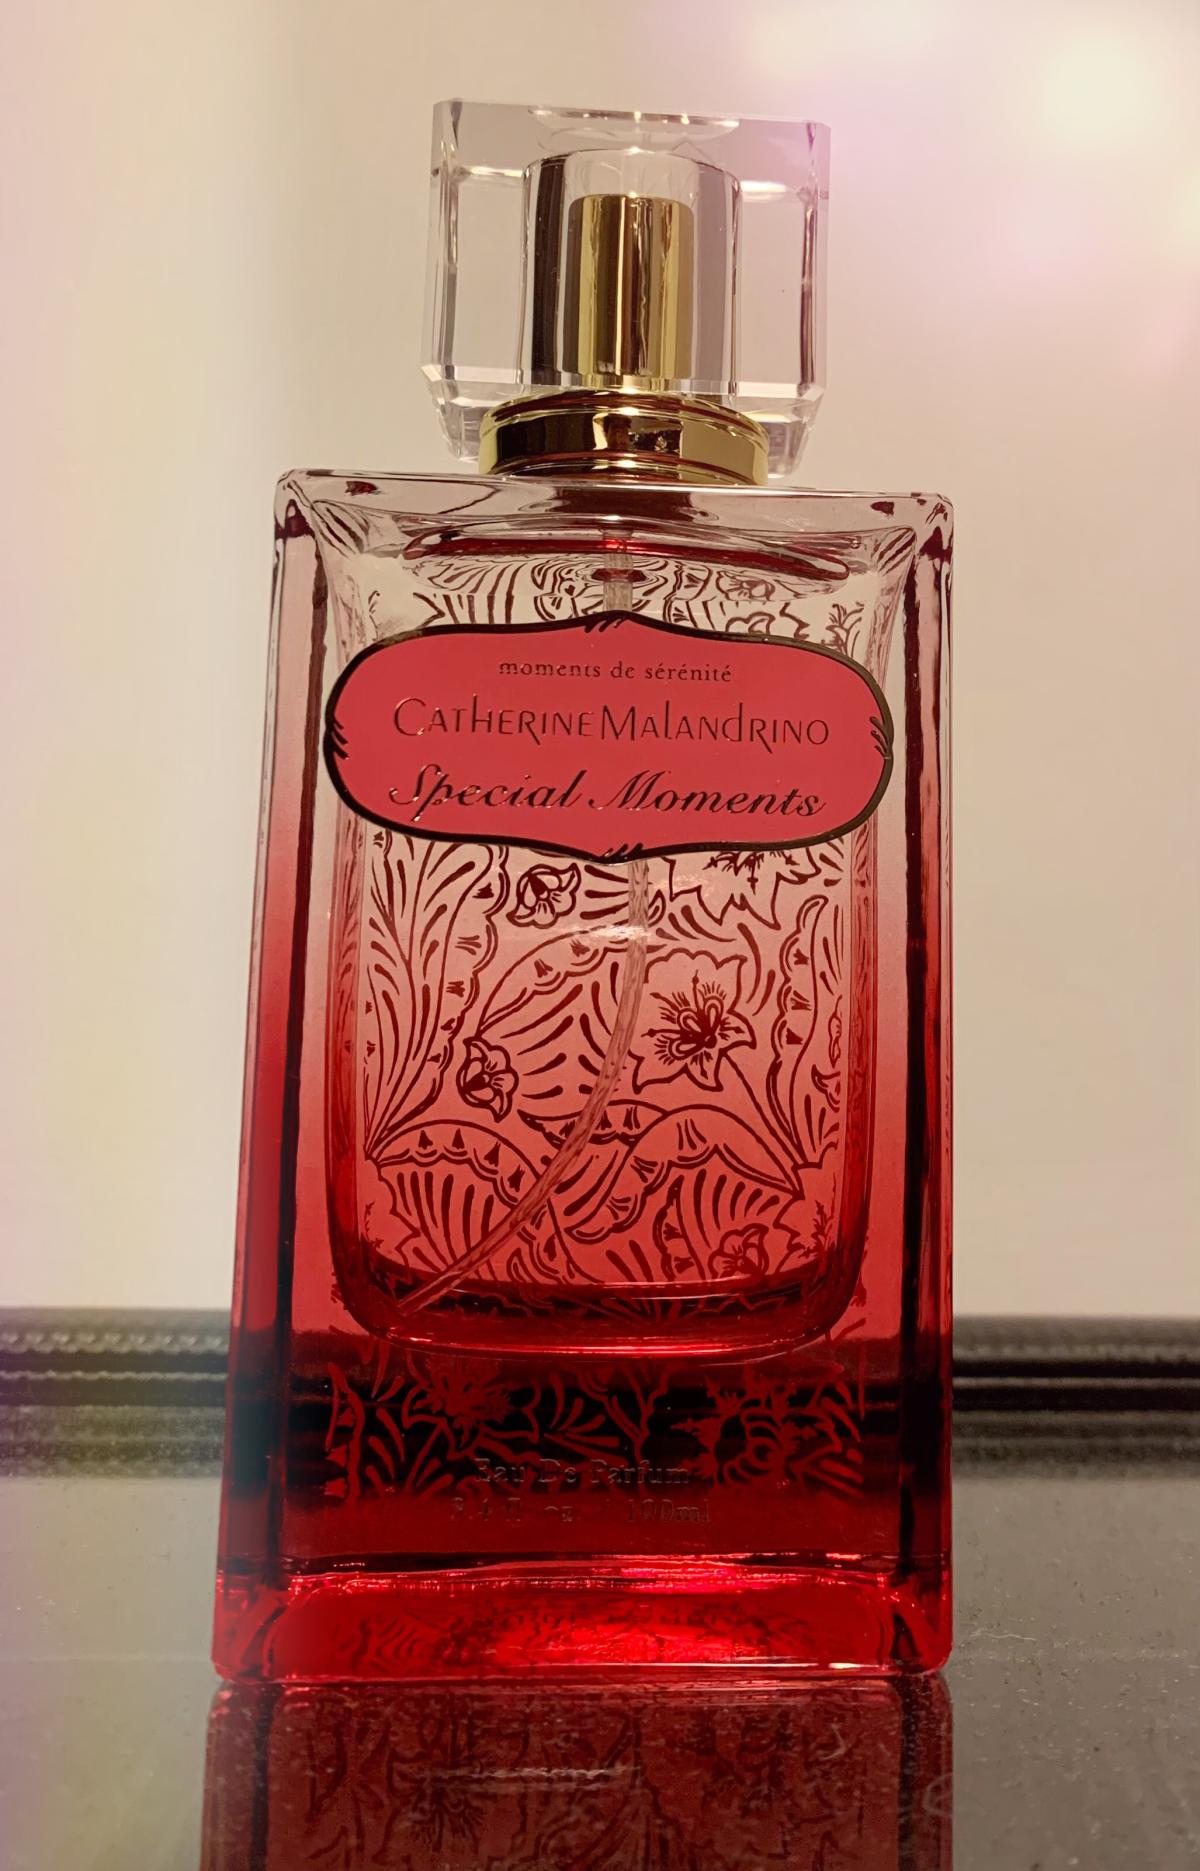 Special Moments Catherine Malandrino perfume - a new fragrance for ...